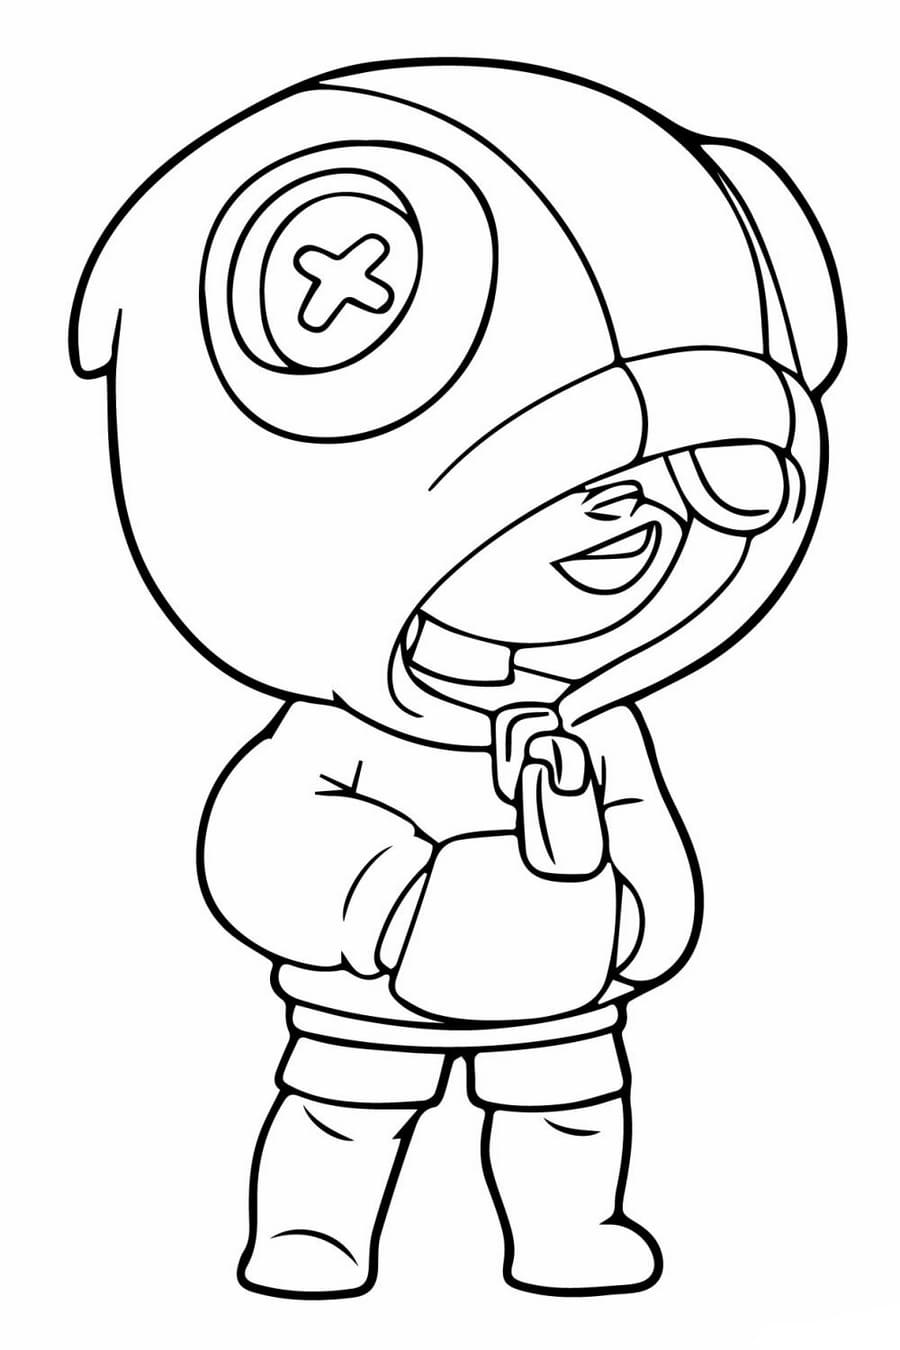 Leon Brawl Stars Coloring Pages Print For Free Wonder Day Coloring Pages For Children And Adults - imagens do leon brawl stars para colorir